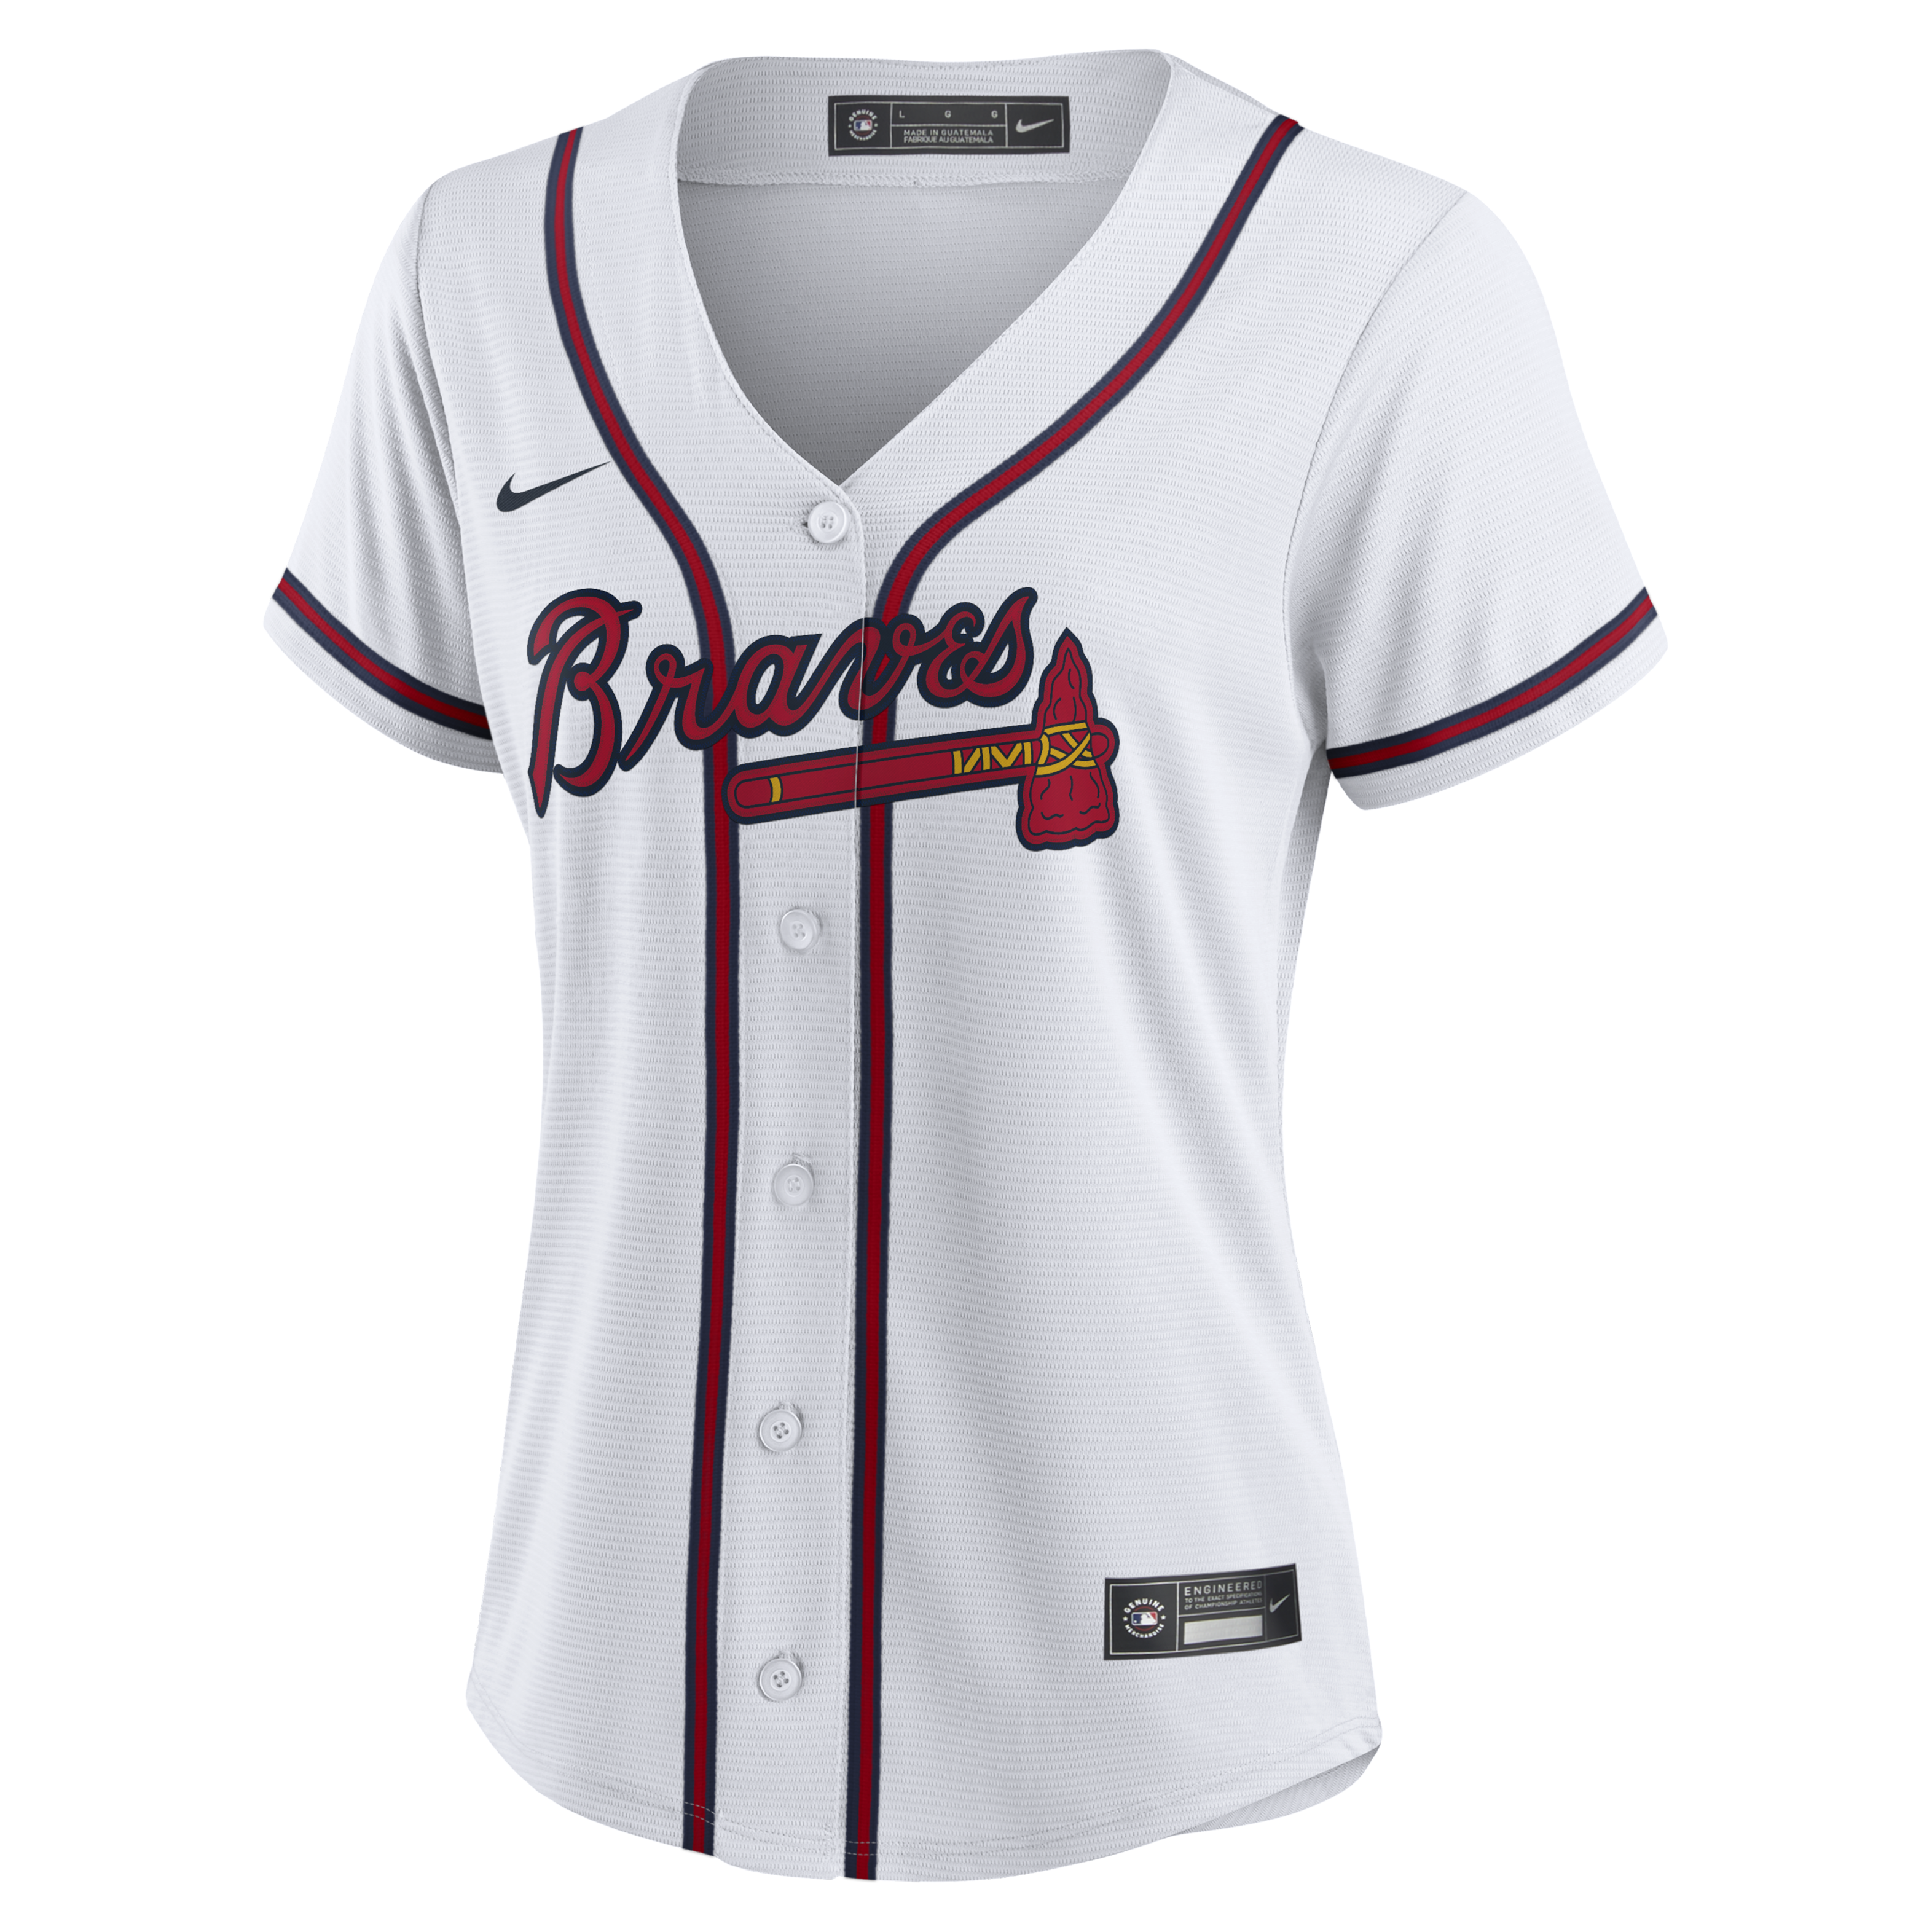 MLB Chicago Cubs (Dansby Swanson) Women's Replica Baseball Jersey.